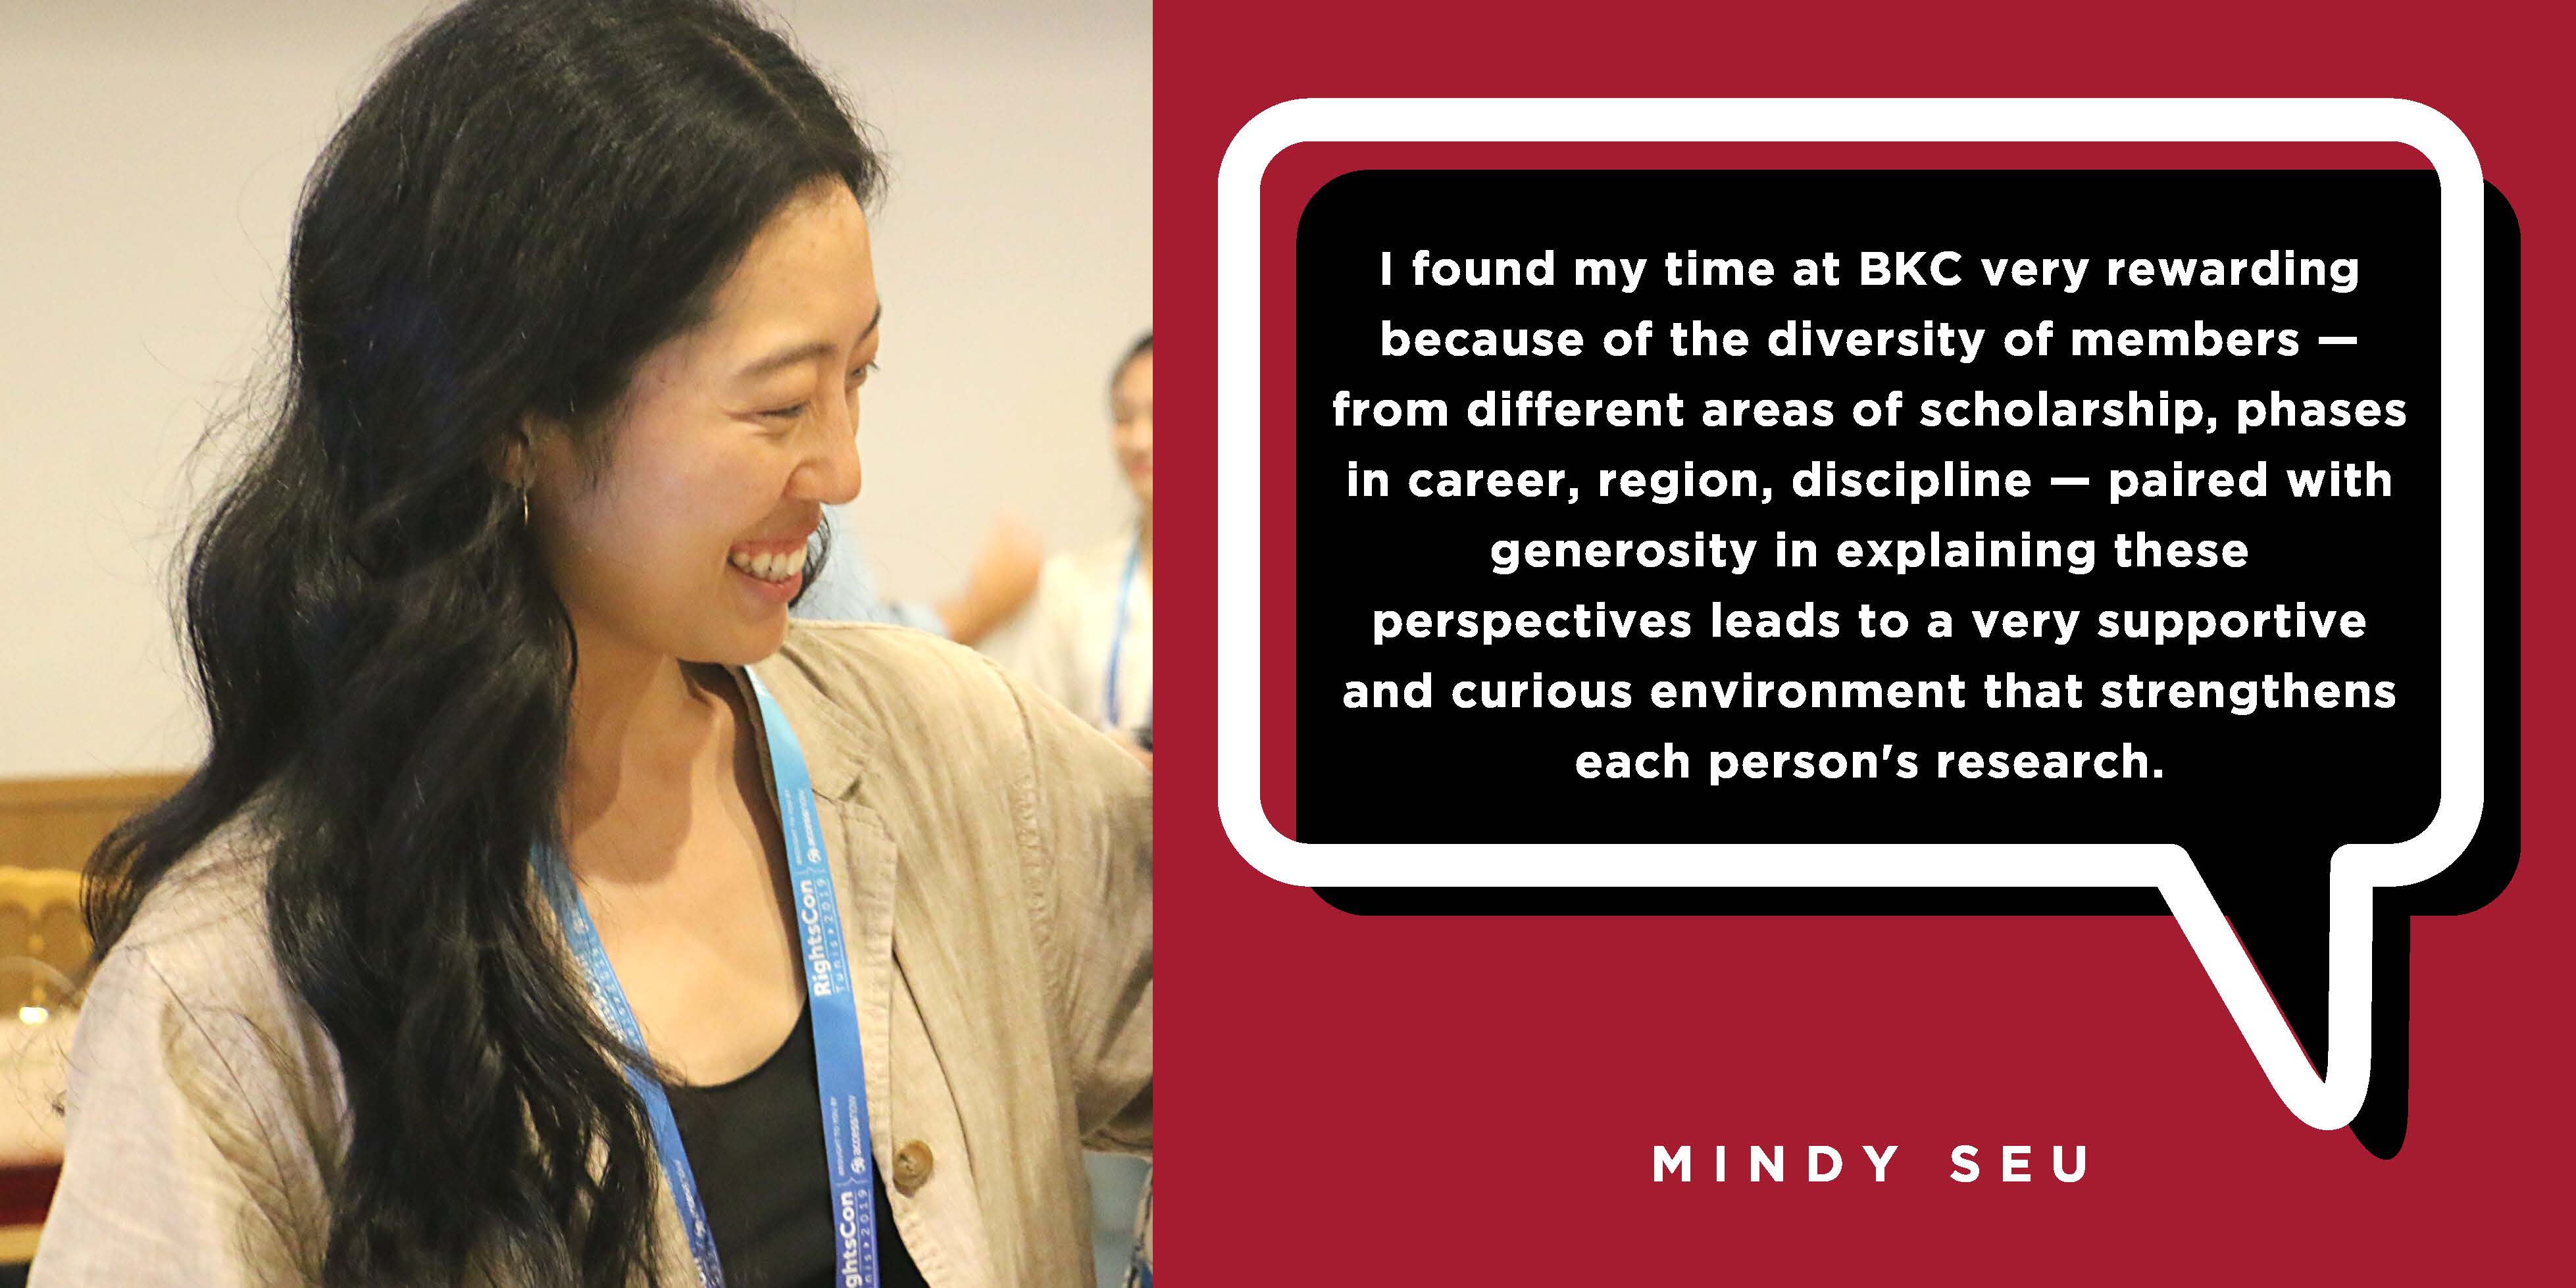 I found my time at BKC very rewarding because of the diversity of members — from different areas of scholarship, phases in career, region, discipline — paired with generosity in explaining these perspectives leads to a very supportive and curious environment that strengthens each person's research. - Mindy Seu